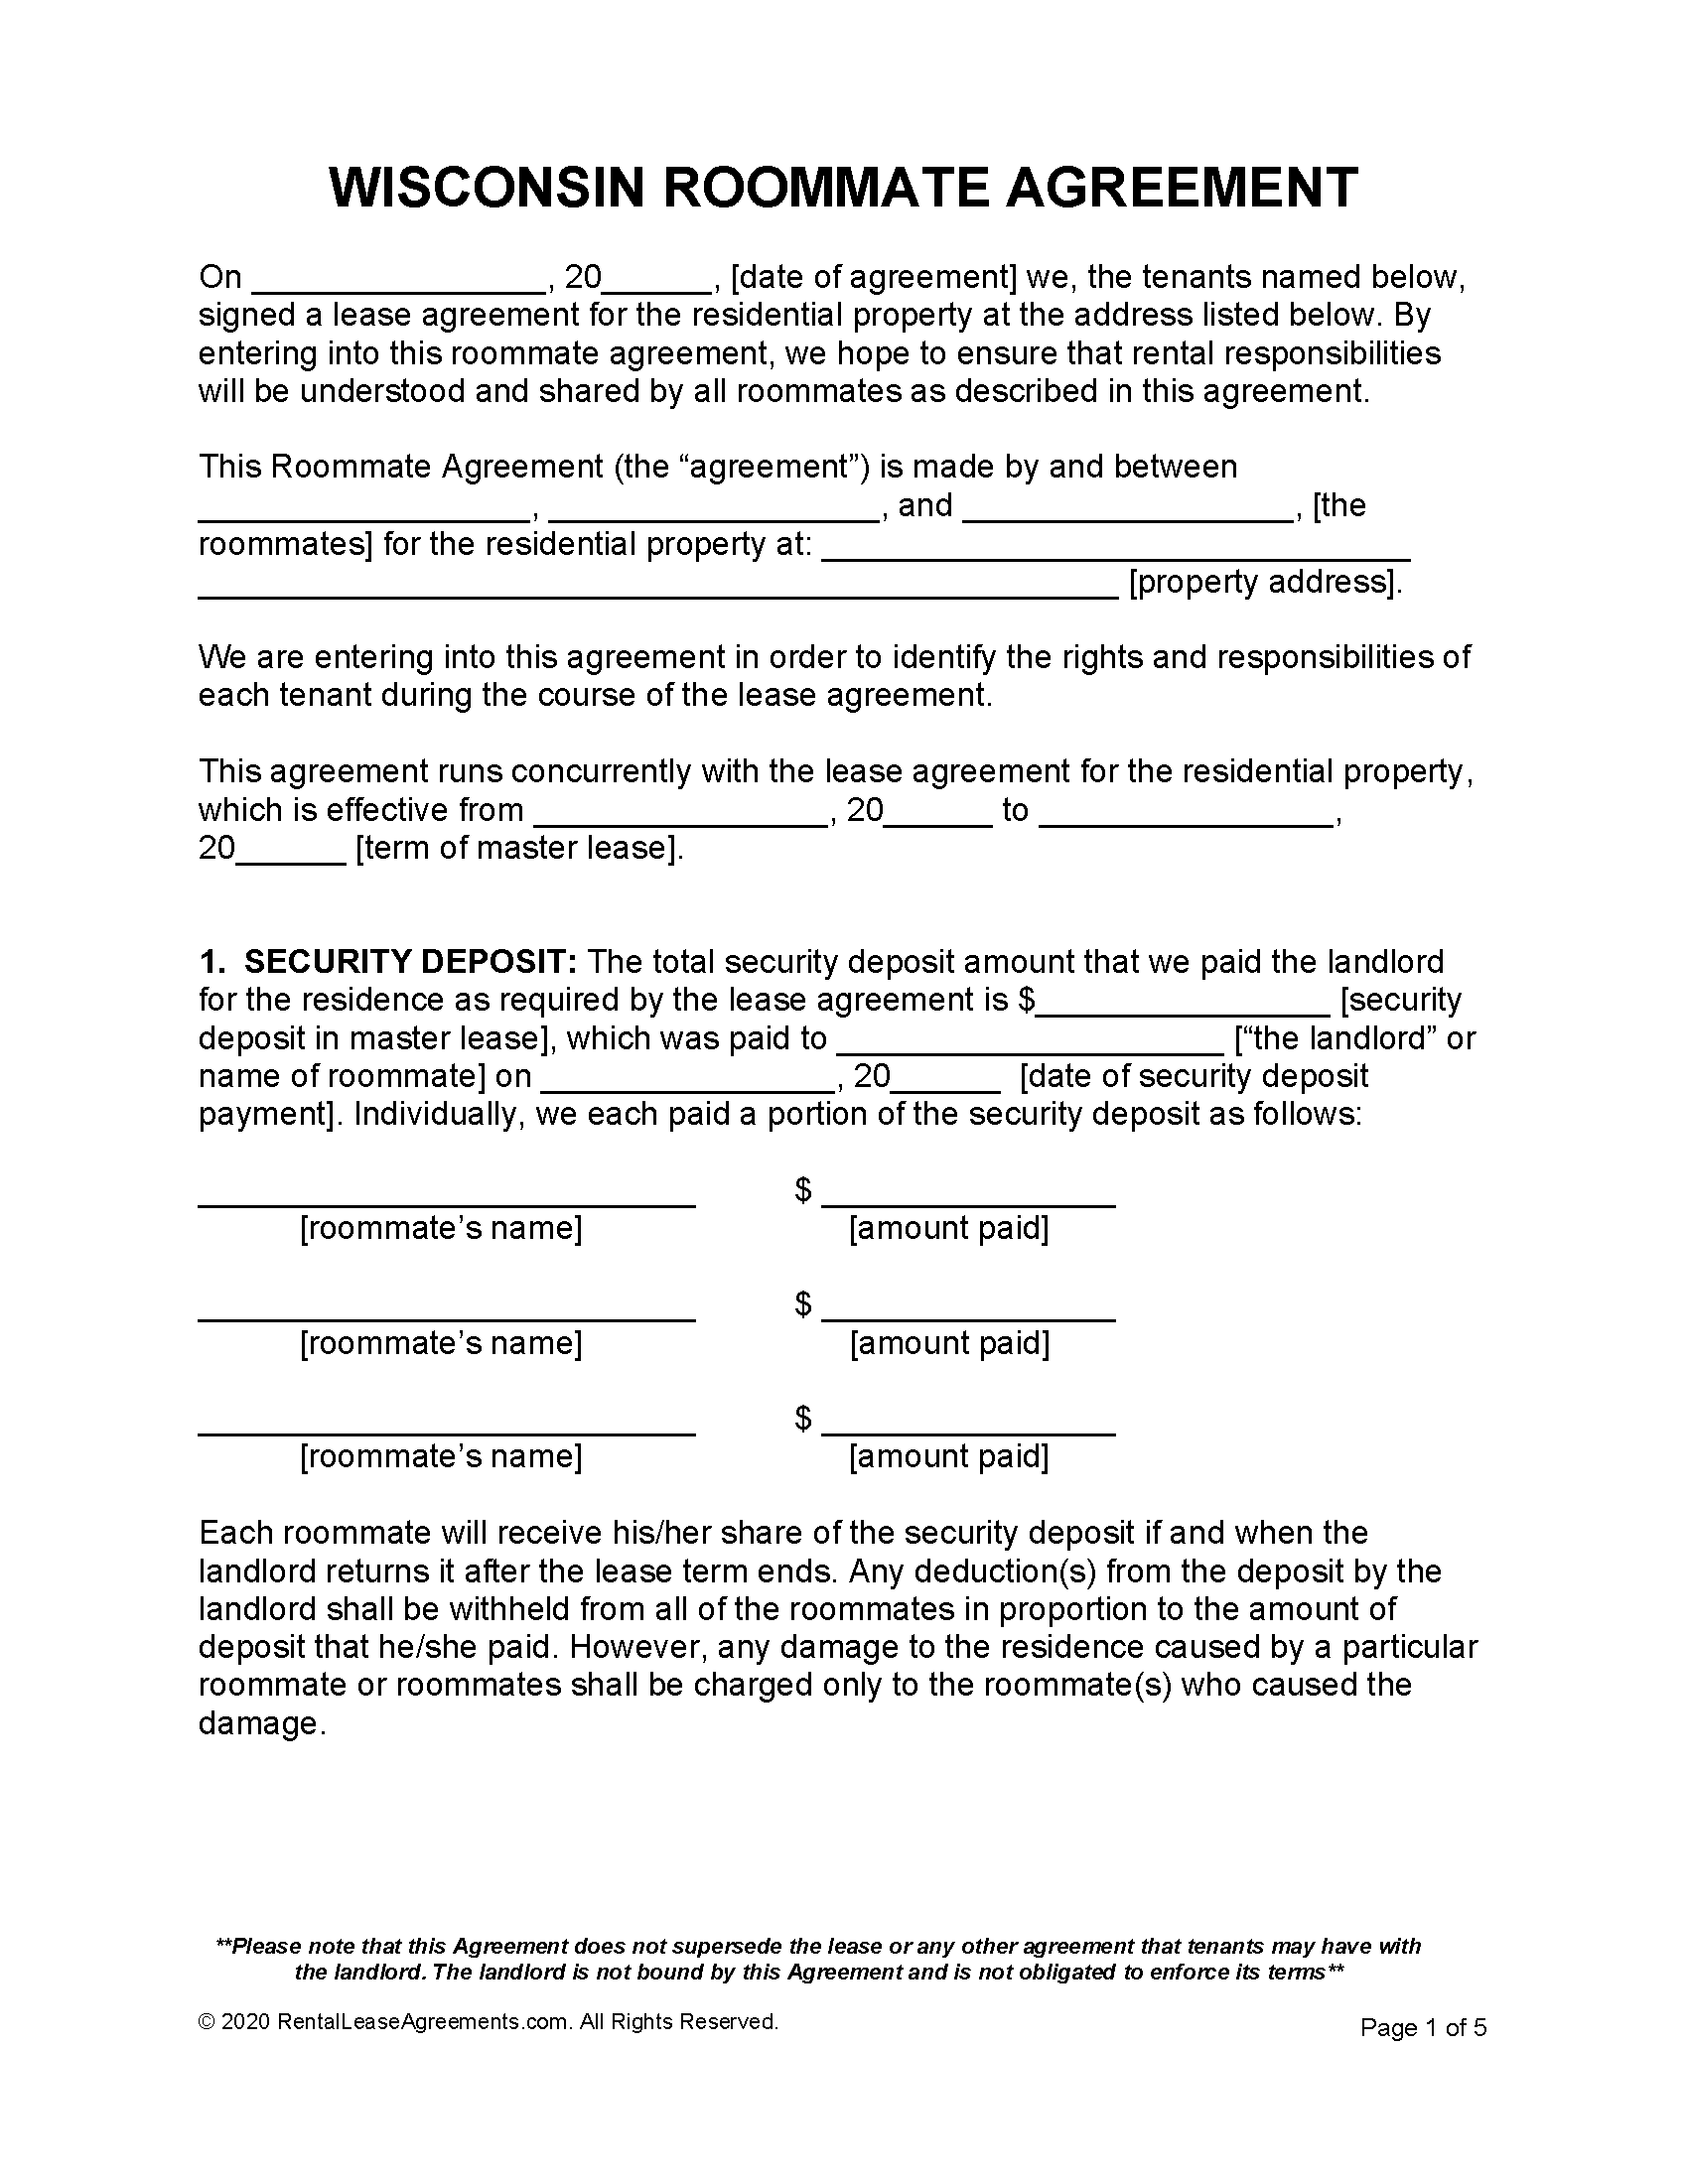 free wisconsin roommate agreement pdf ms word